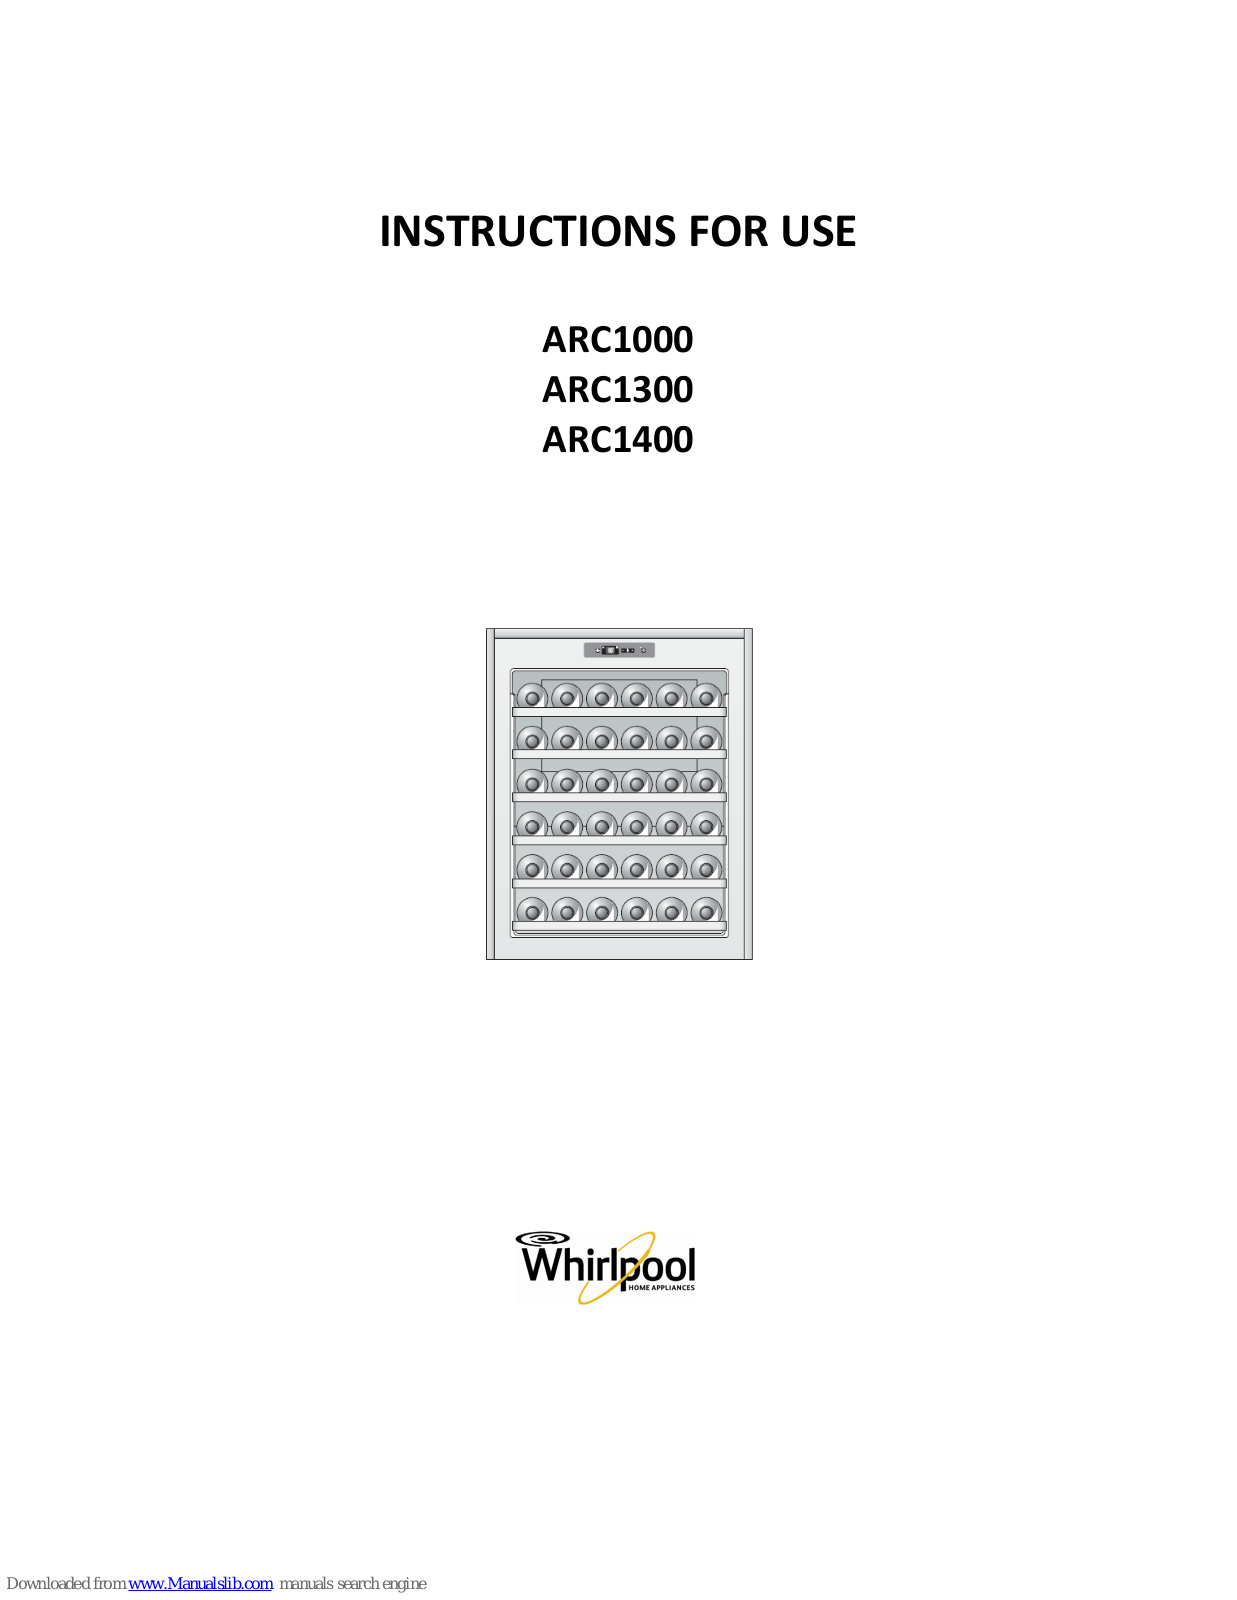 Whirlpool ARC1400, ARC1000, ARC1300 Instructions For Use Manual